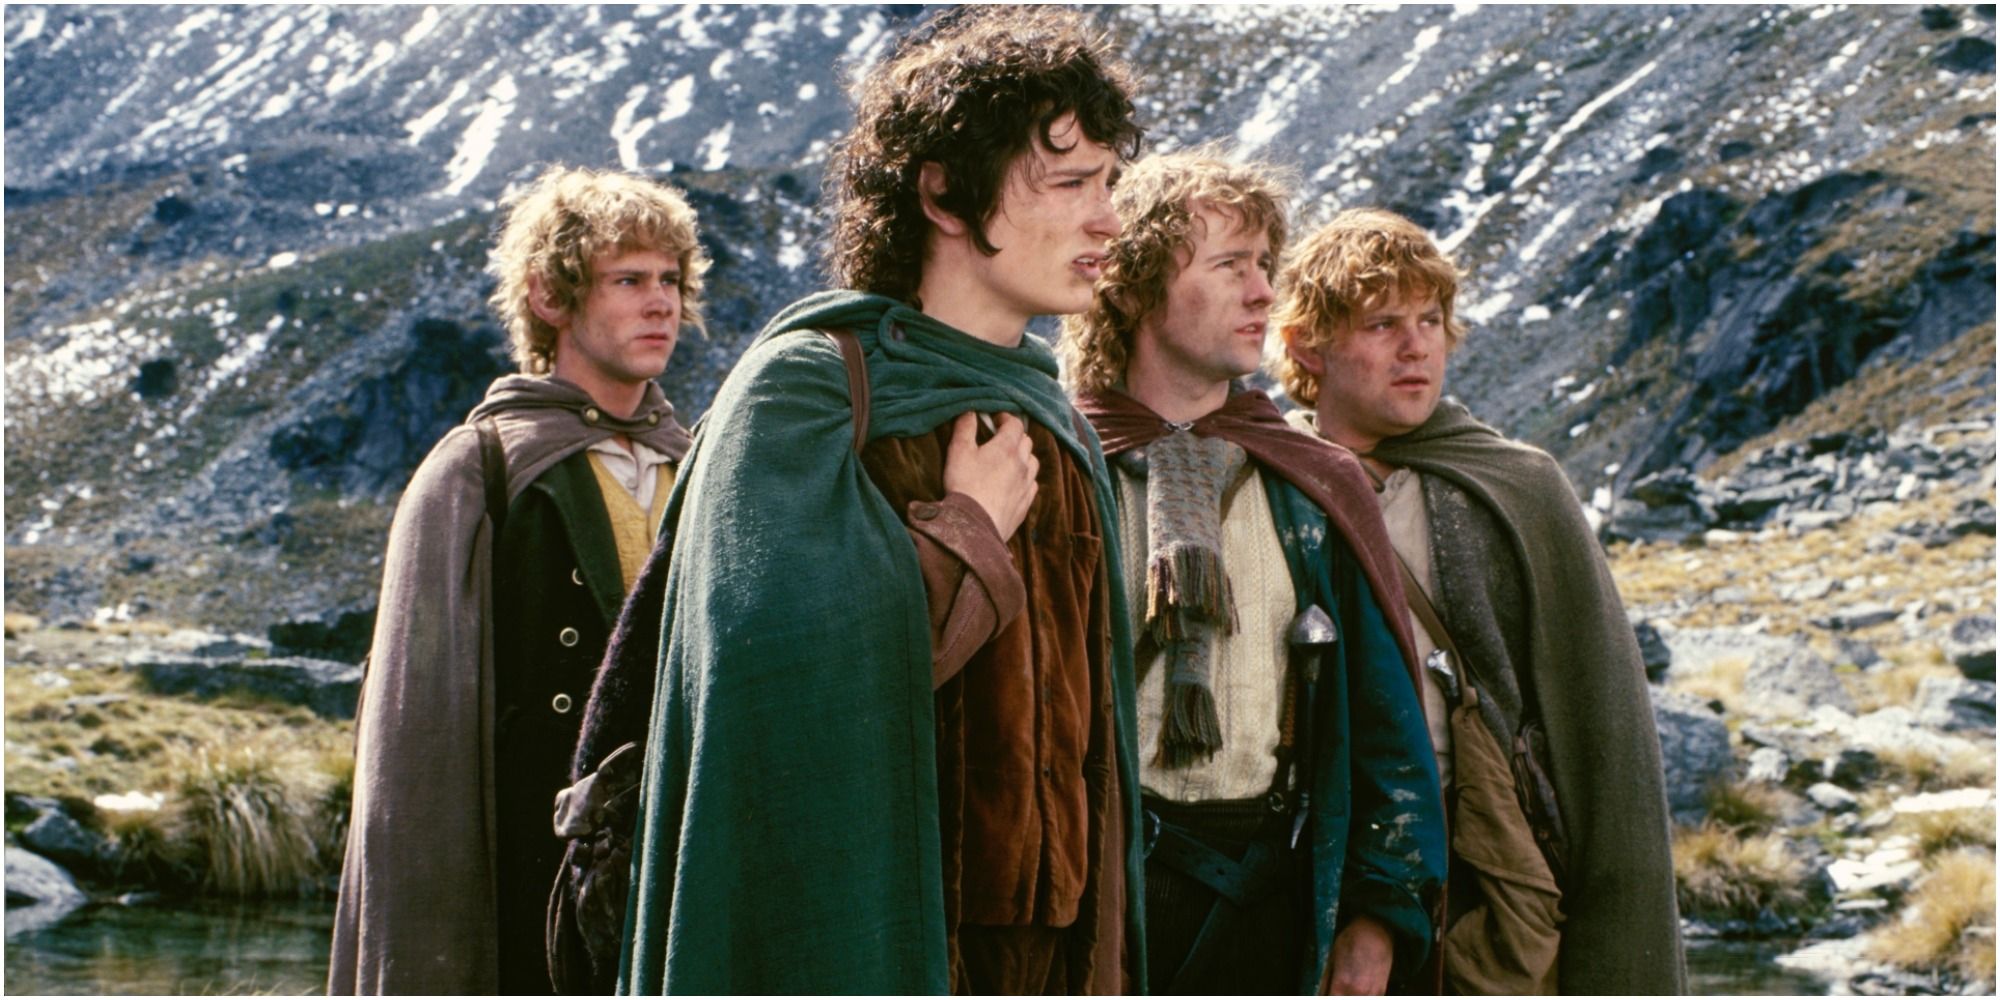 The Hobbits in Fellowship of the Ring